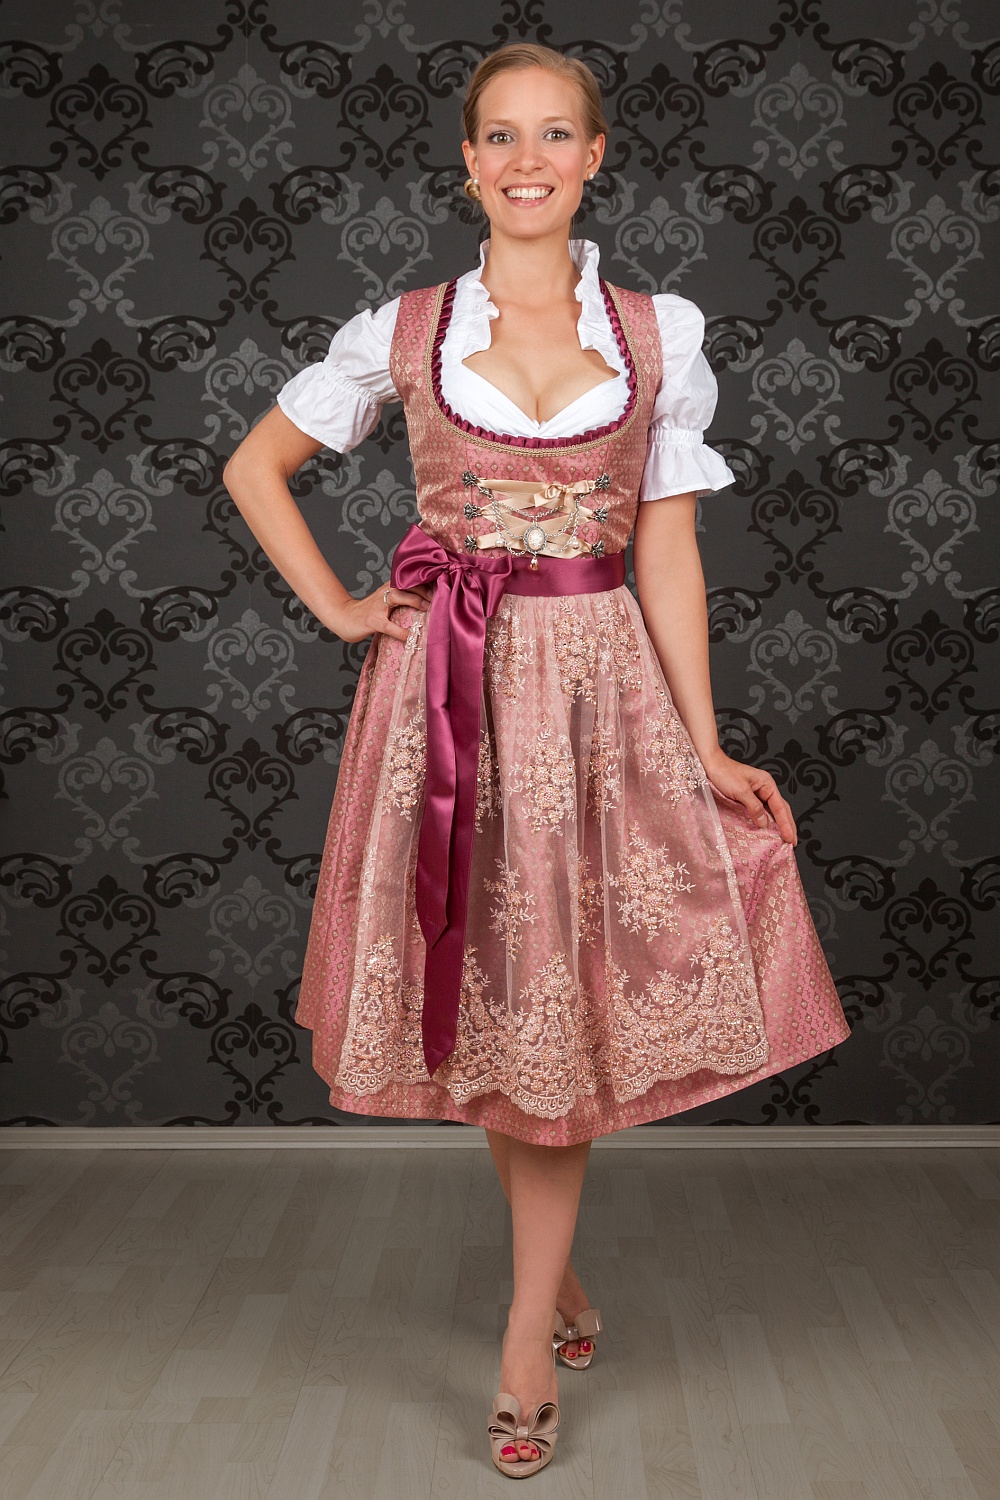 Made in Germany Dirndl Victoria